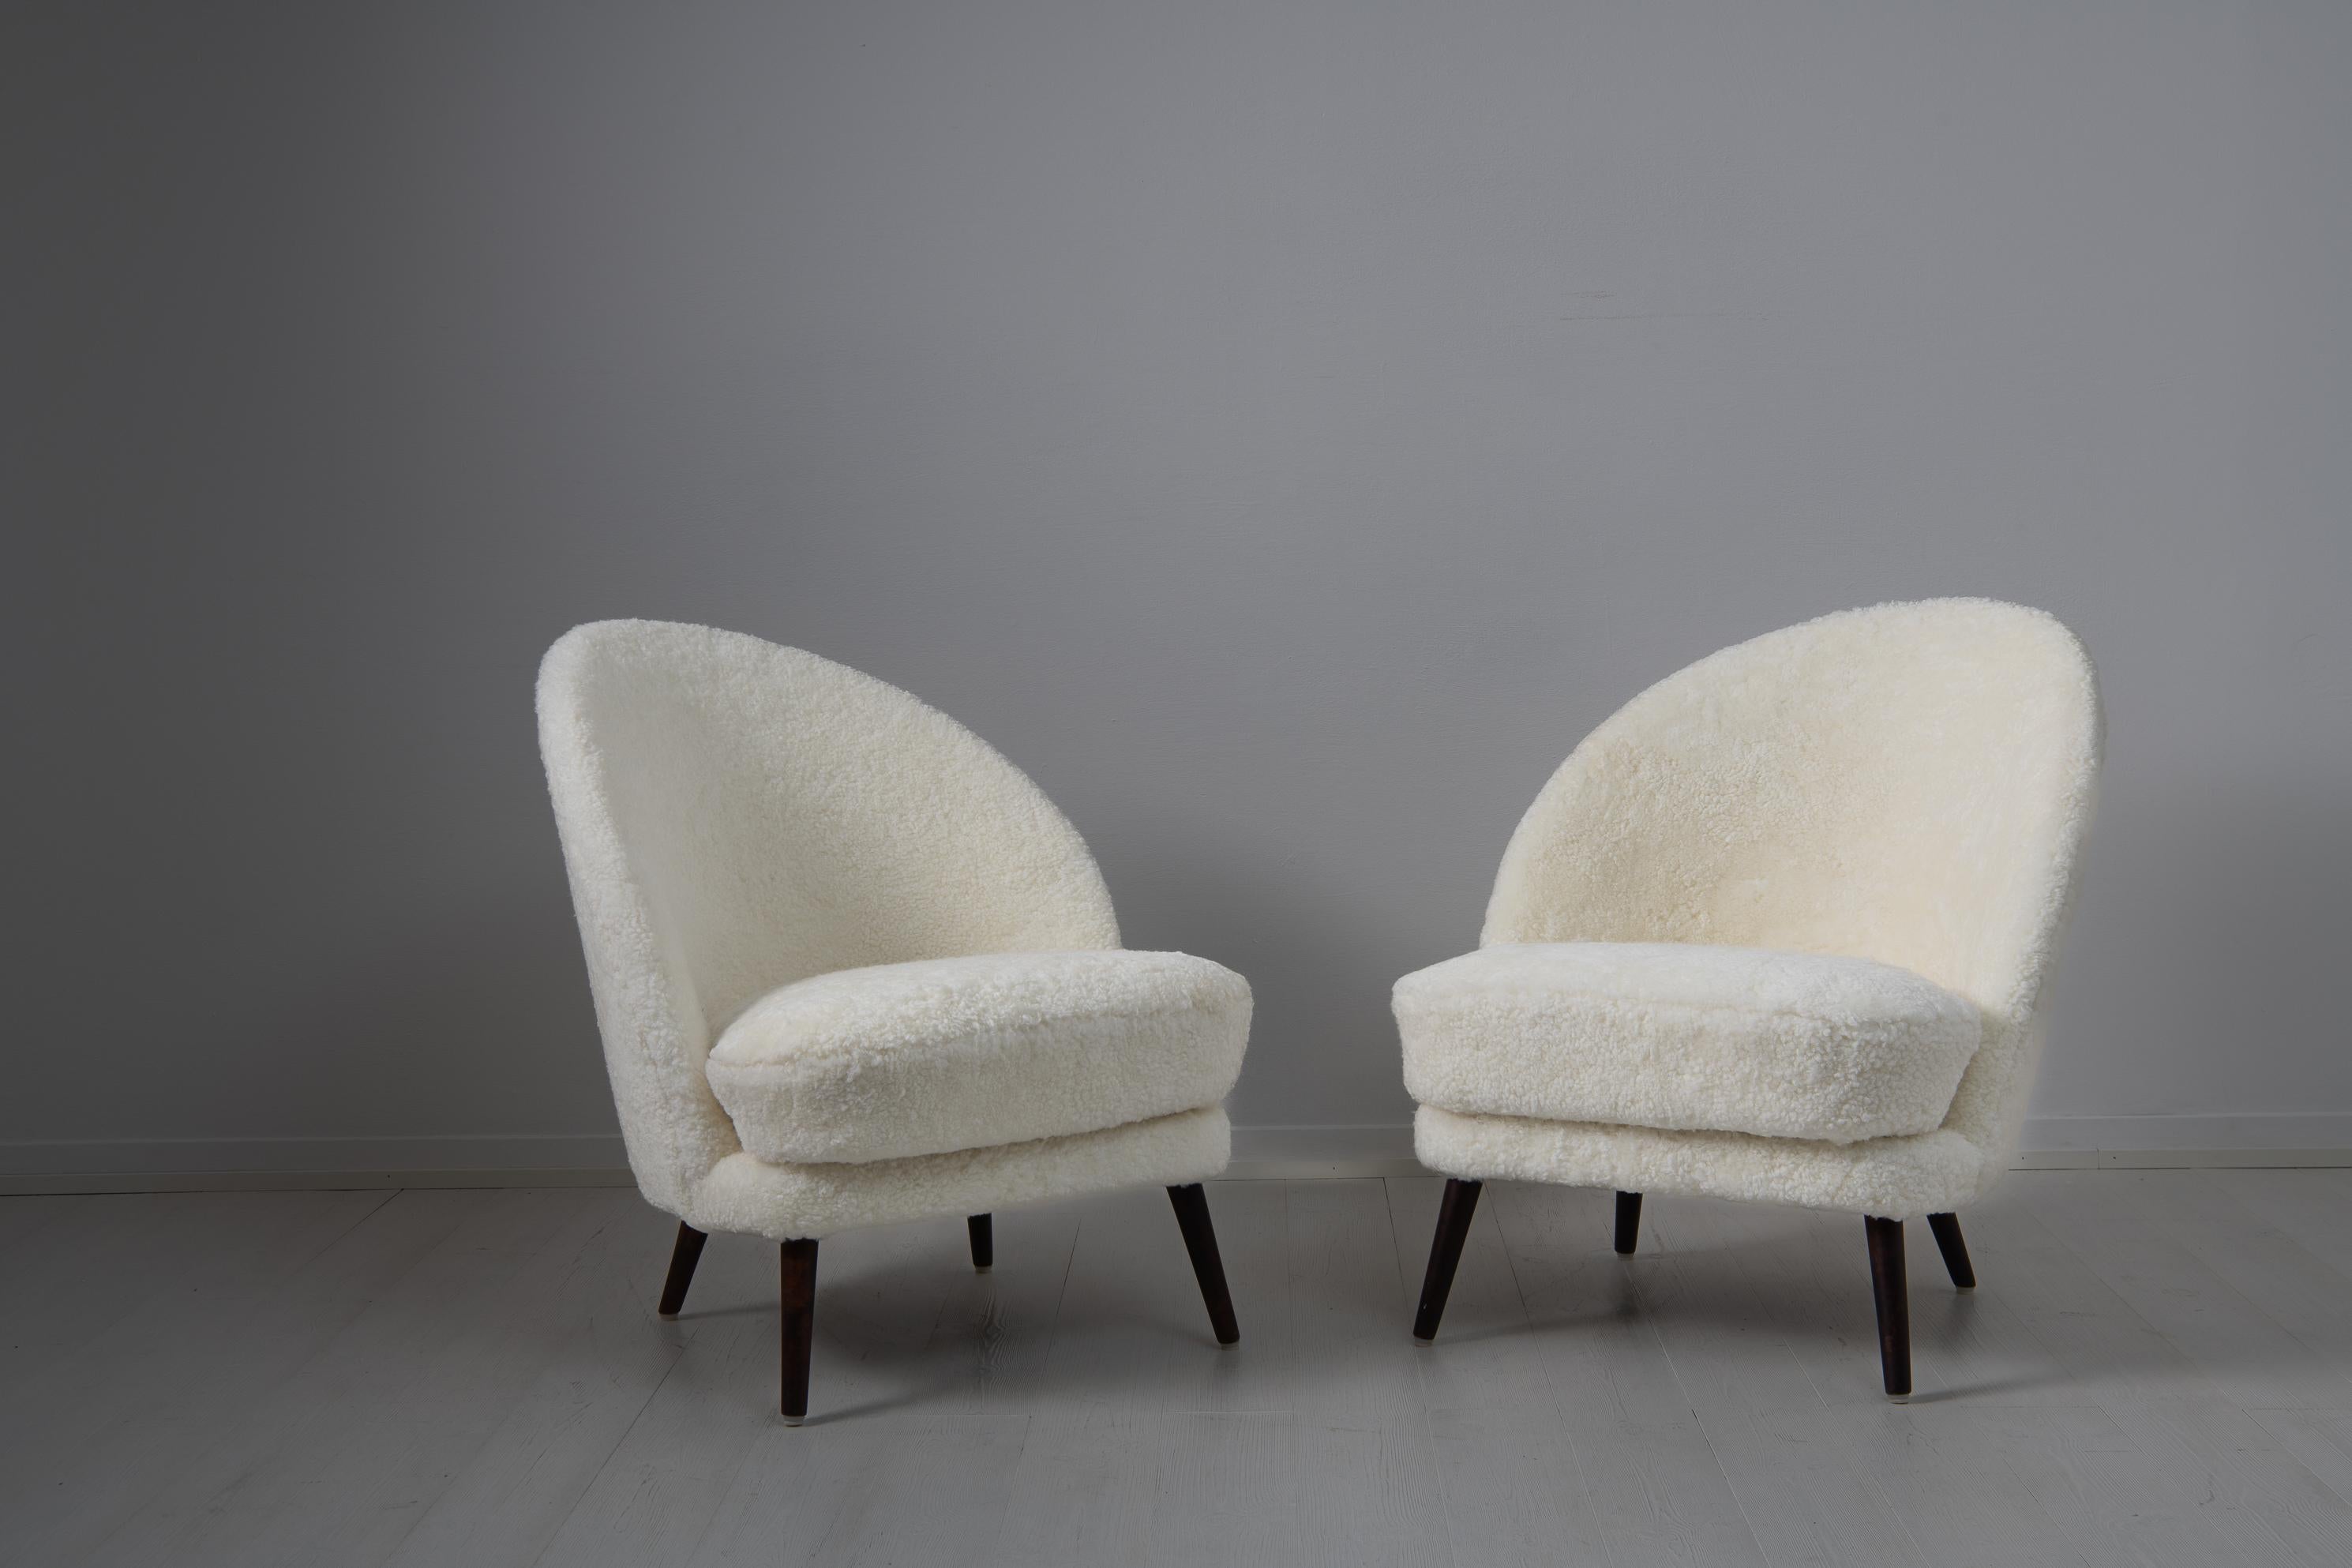 Scandinavian modern sheepskin chairs attributed to Arne Norell, Sweden from the mid 20th century. The chairs have an asymmetrical back and legs in stained birch. The design is clean and classic with the asymmetry creating extra interest and a twist.